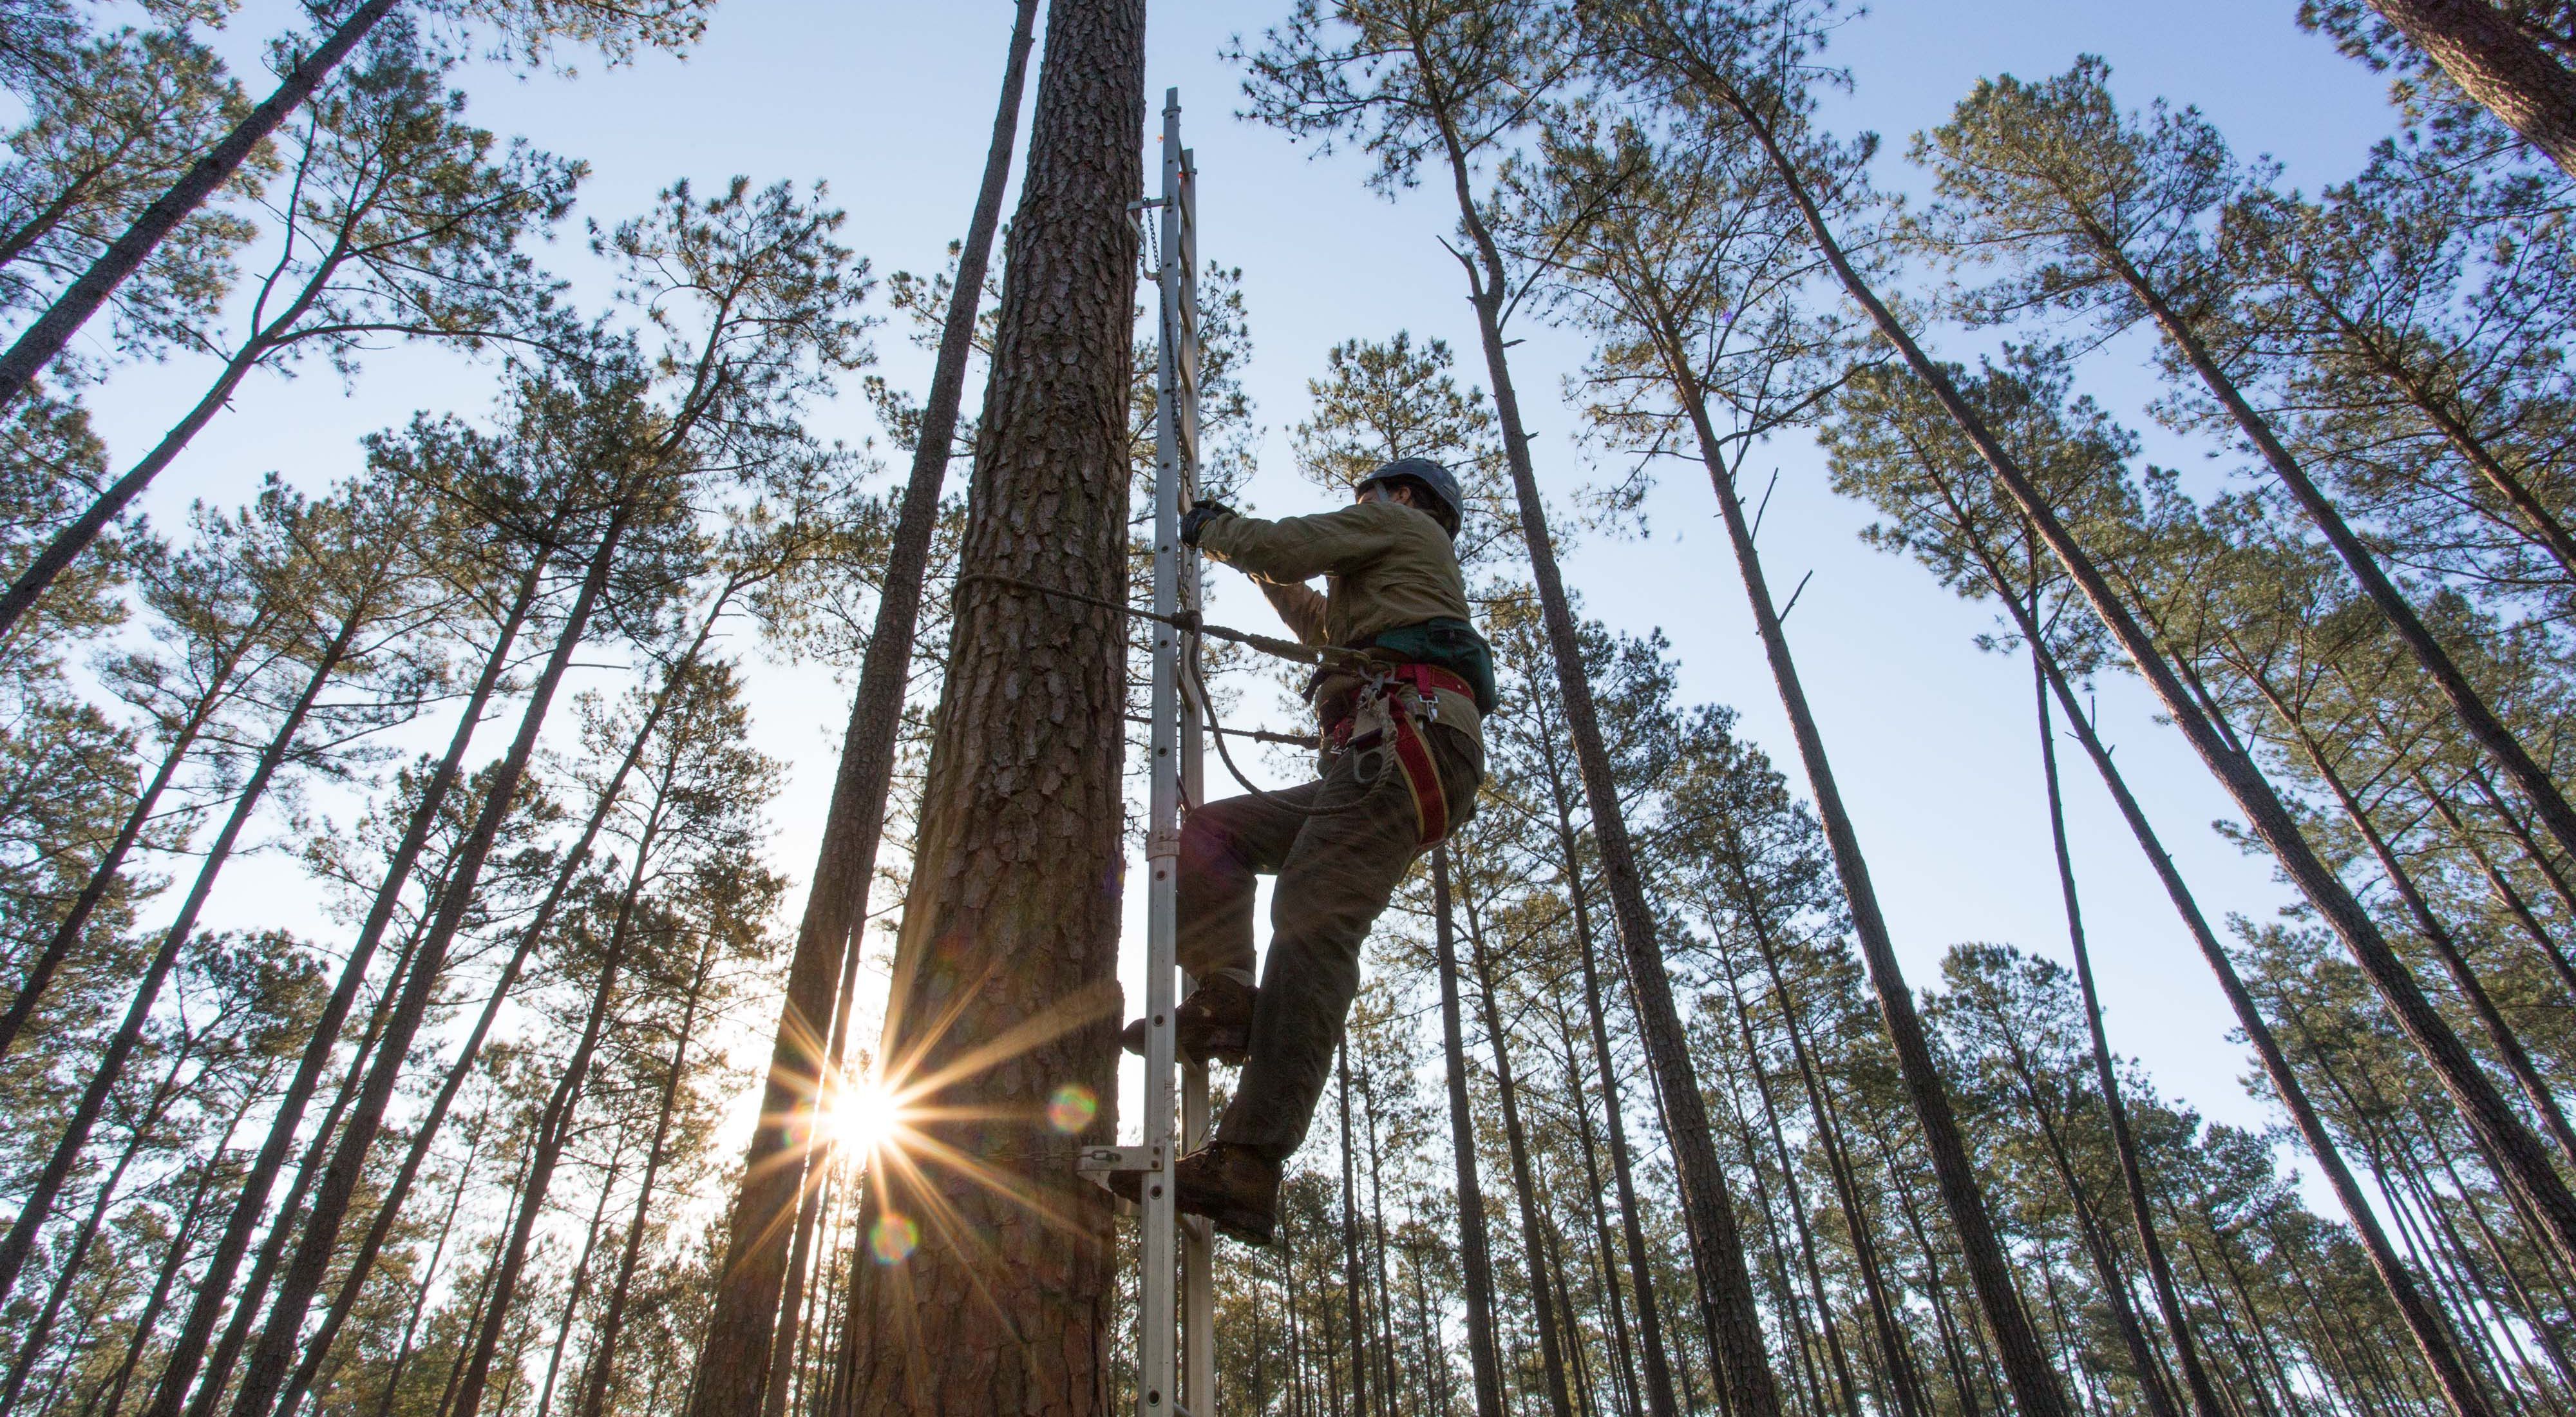 A man wearing a hardhat and harness climbs up a metal ladder affixed to the side of a longleaf pine tree.